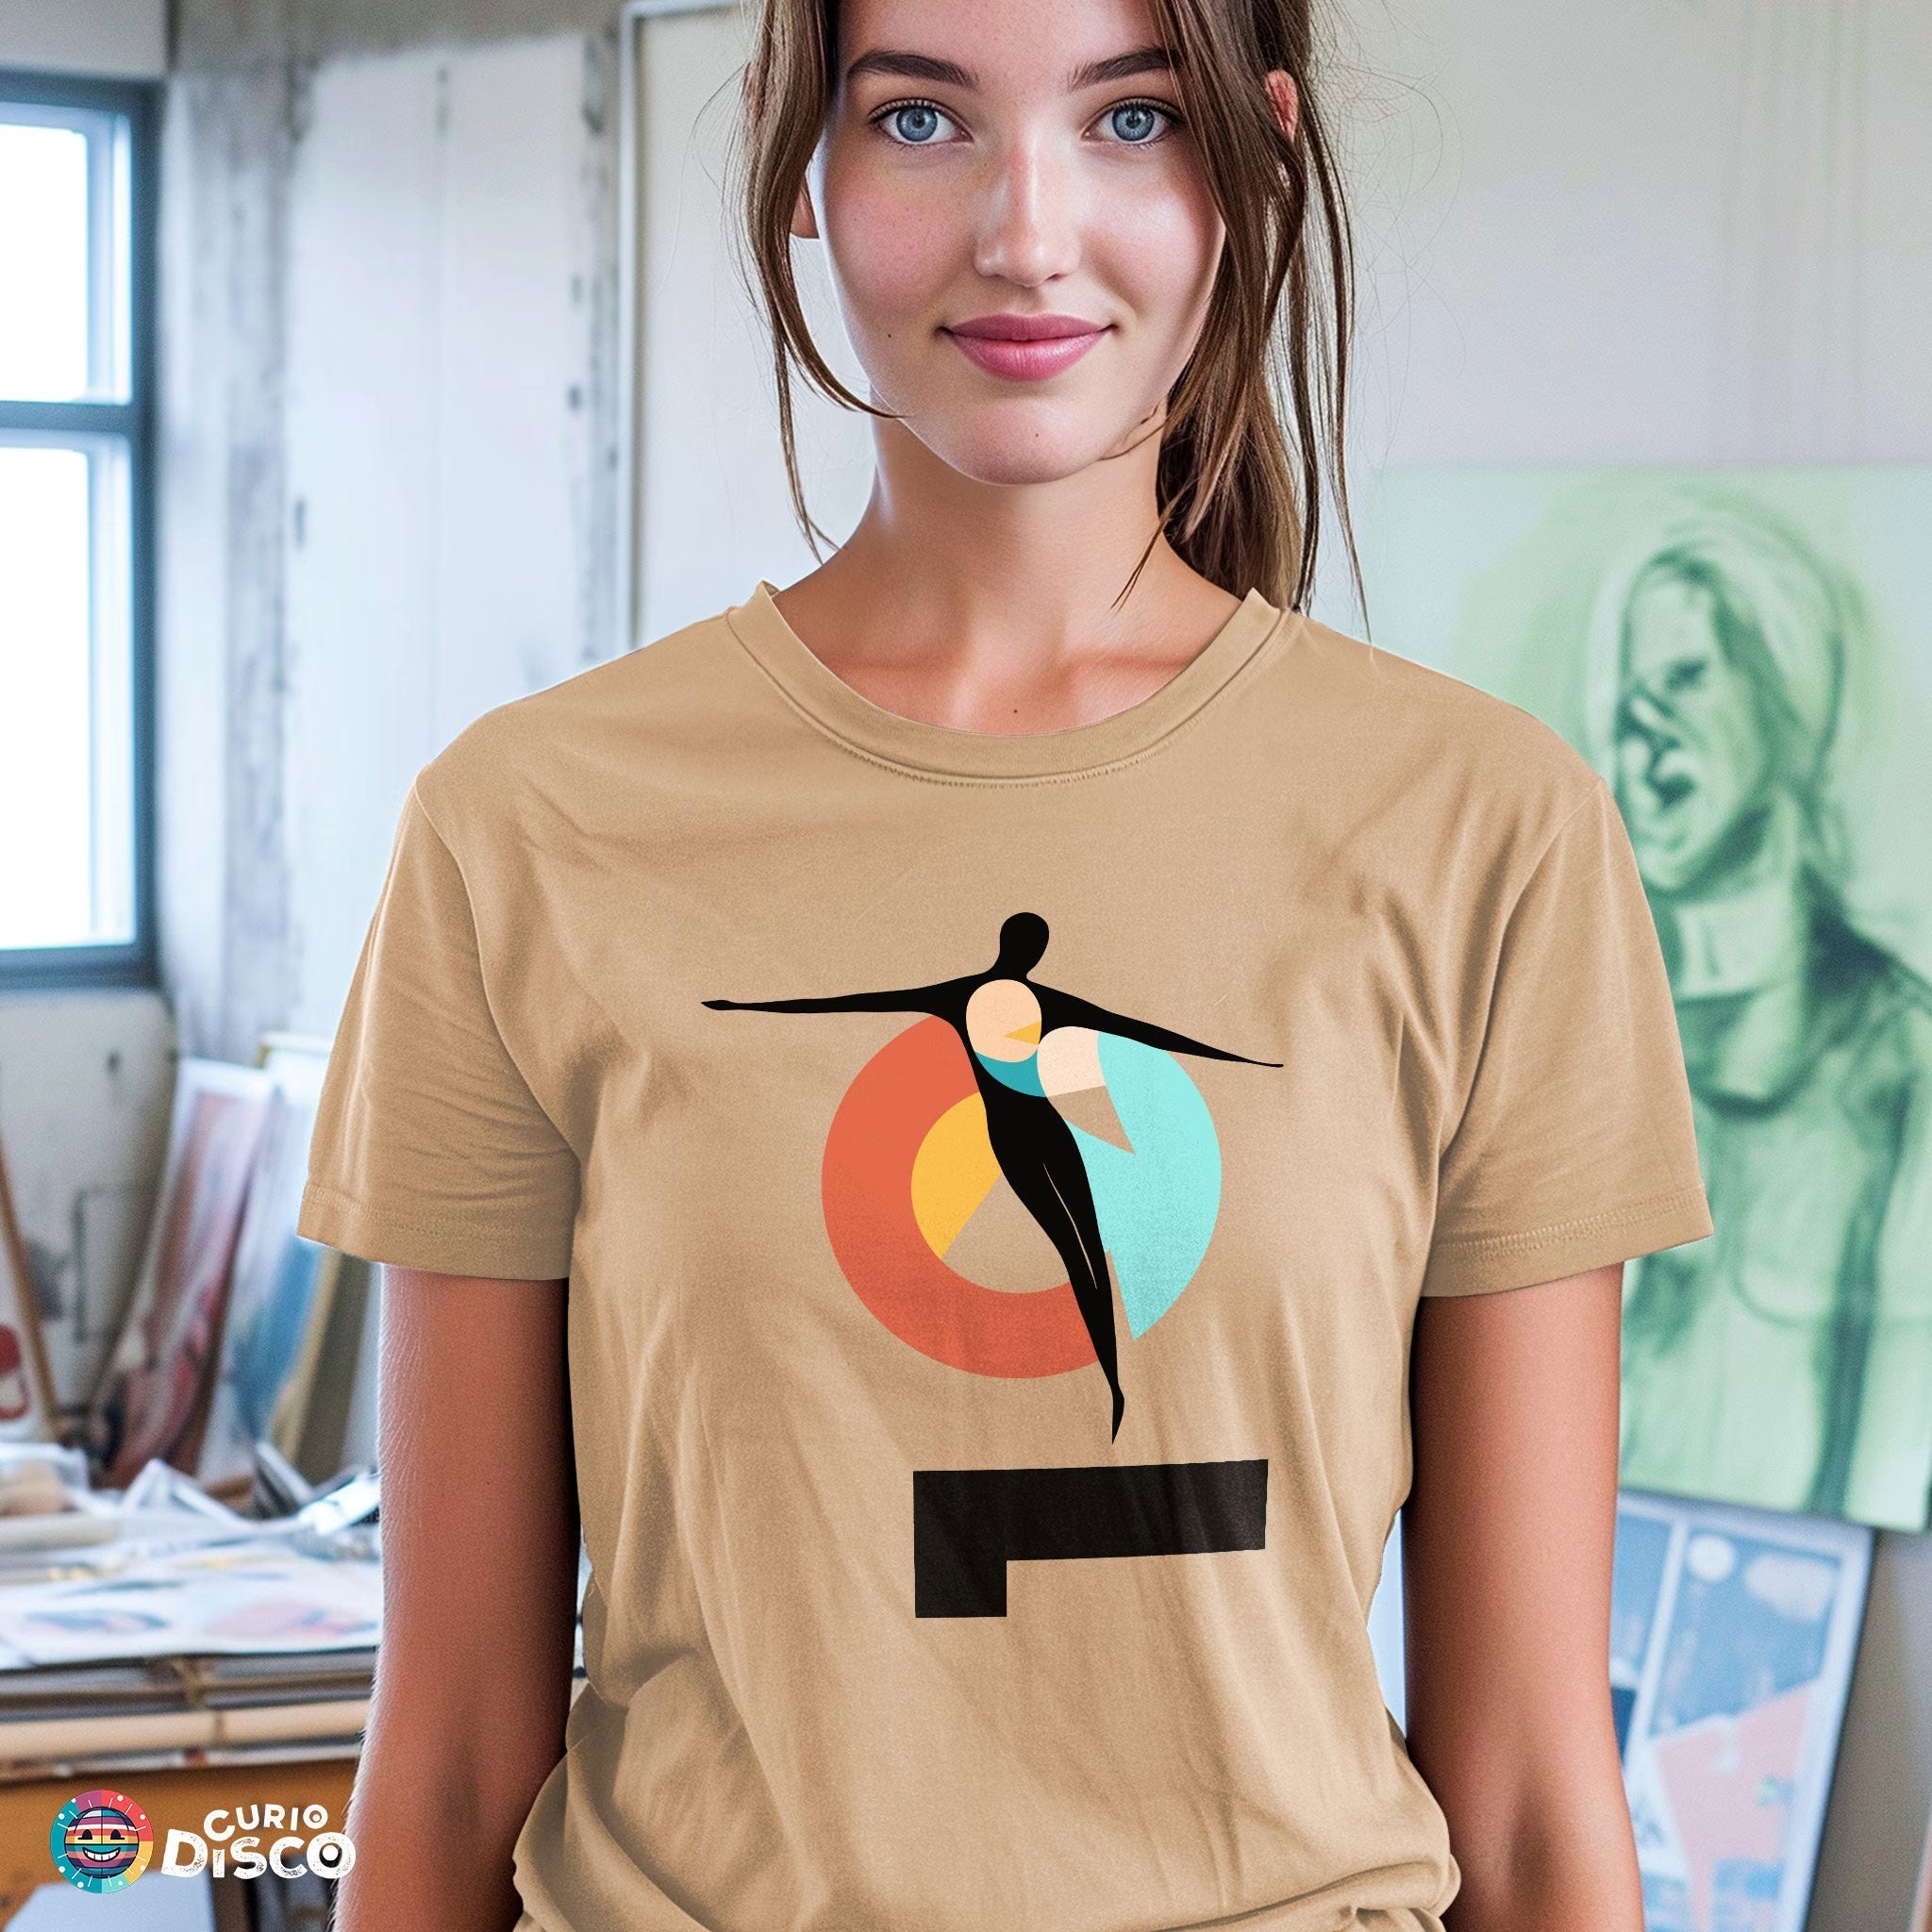 Tan short-sleeve T-shirt. Womens clothing designer shirt with geometric art, ladies gifts or yoga gifts for her; inspirational shirt, minimalist fashion, trending shirts style, offers inner peace relax in plus size shirts as self care gift, spiritual gifts for art lover tee